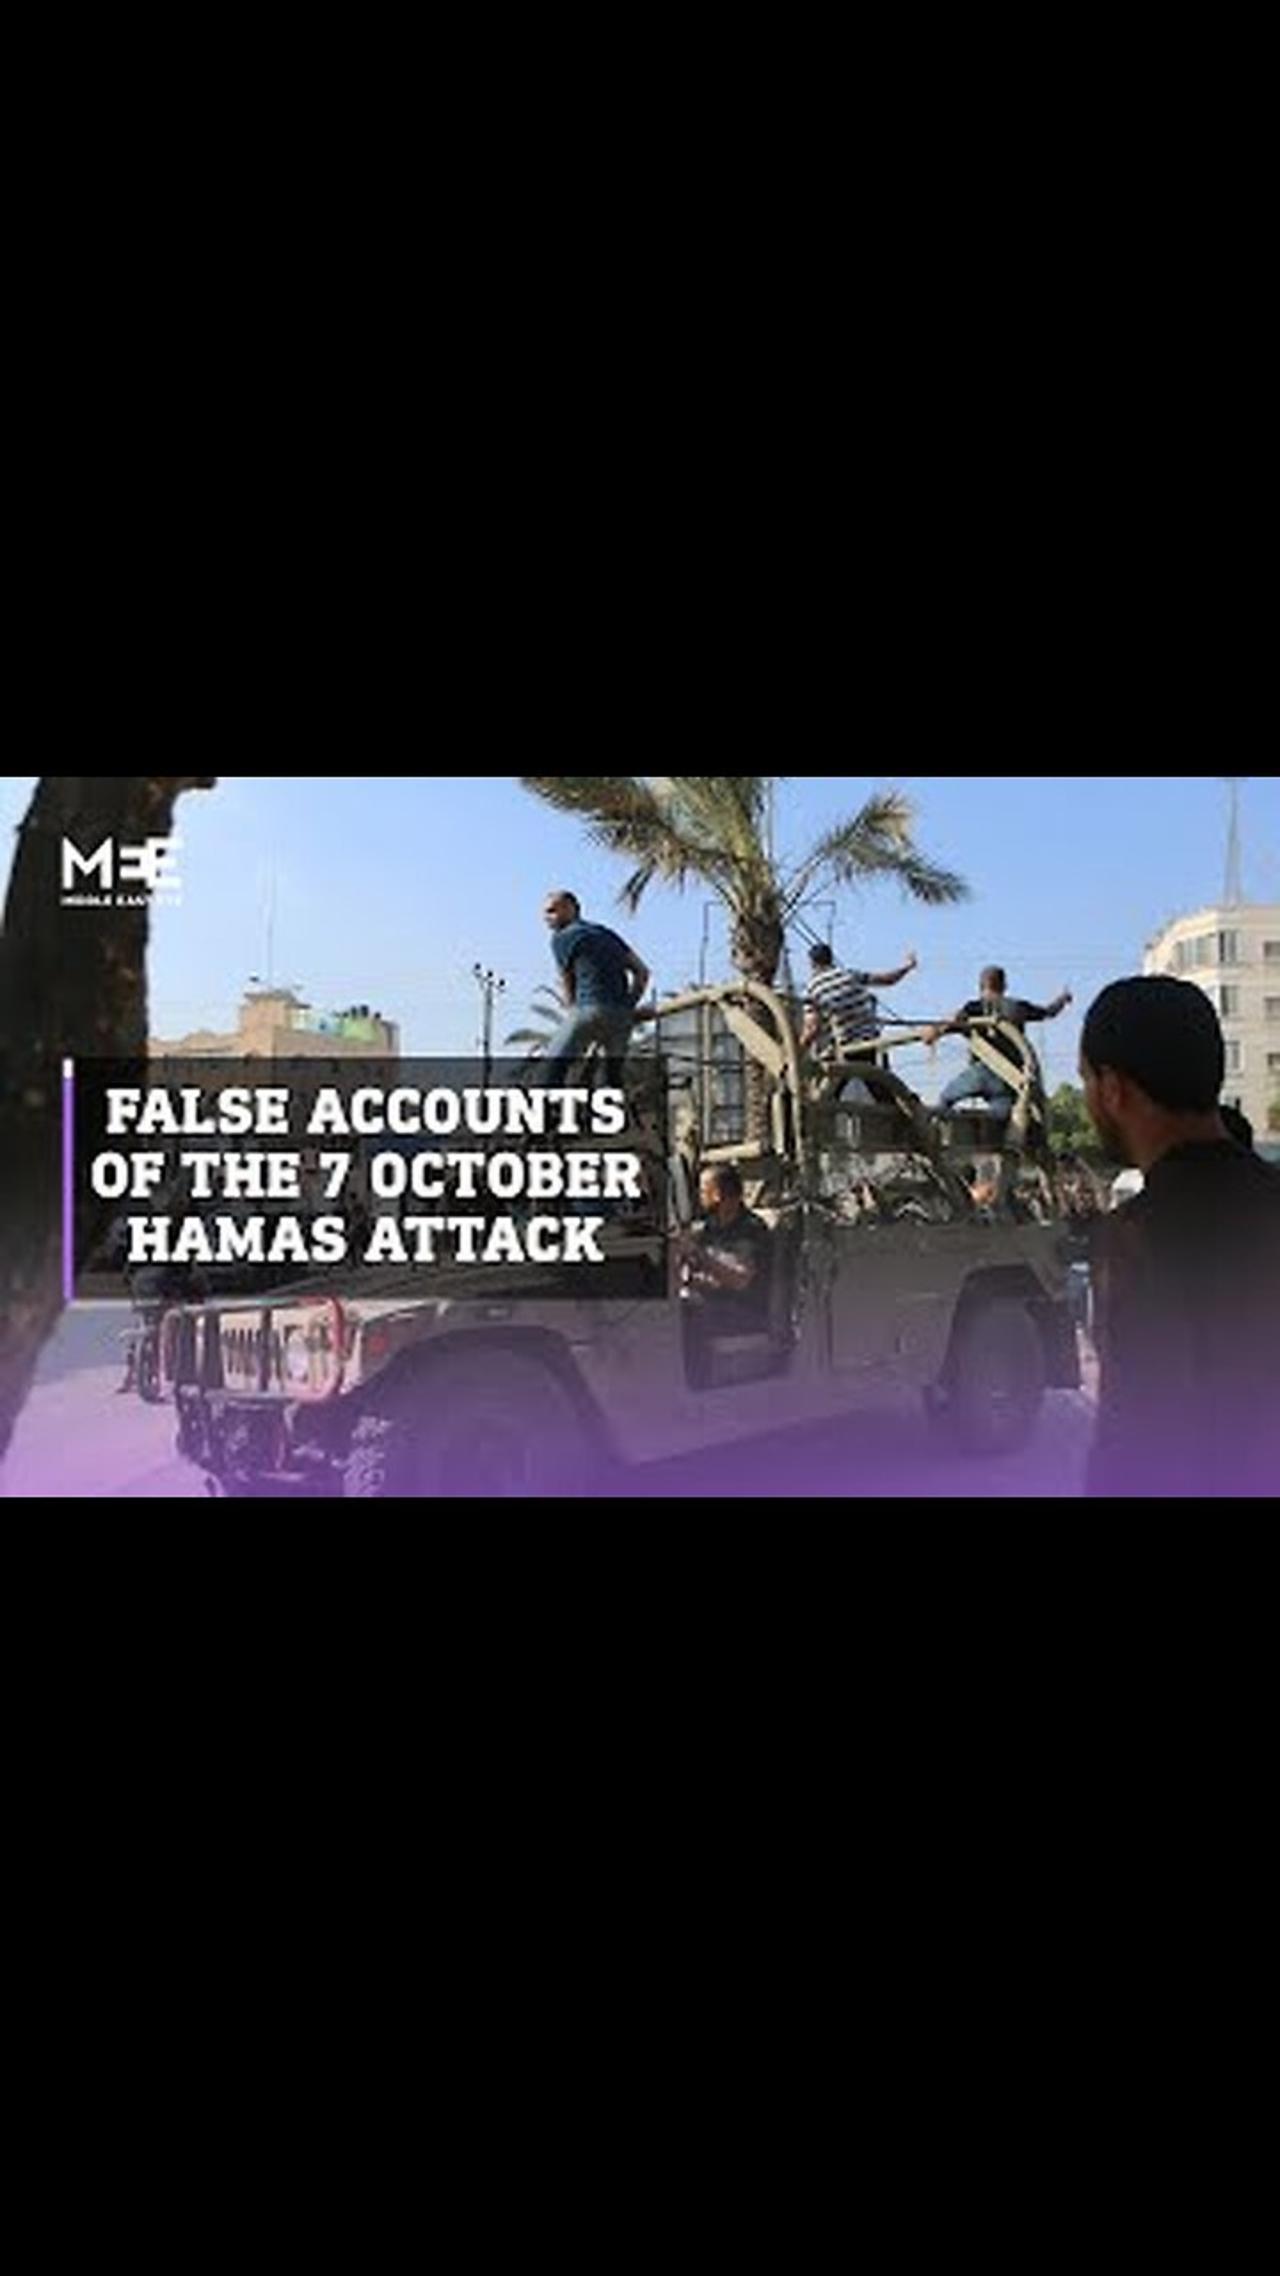 Haaretz article: Detailing unverified and inaccurate accounts of the 7 October Hamas attack